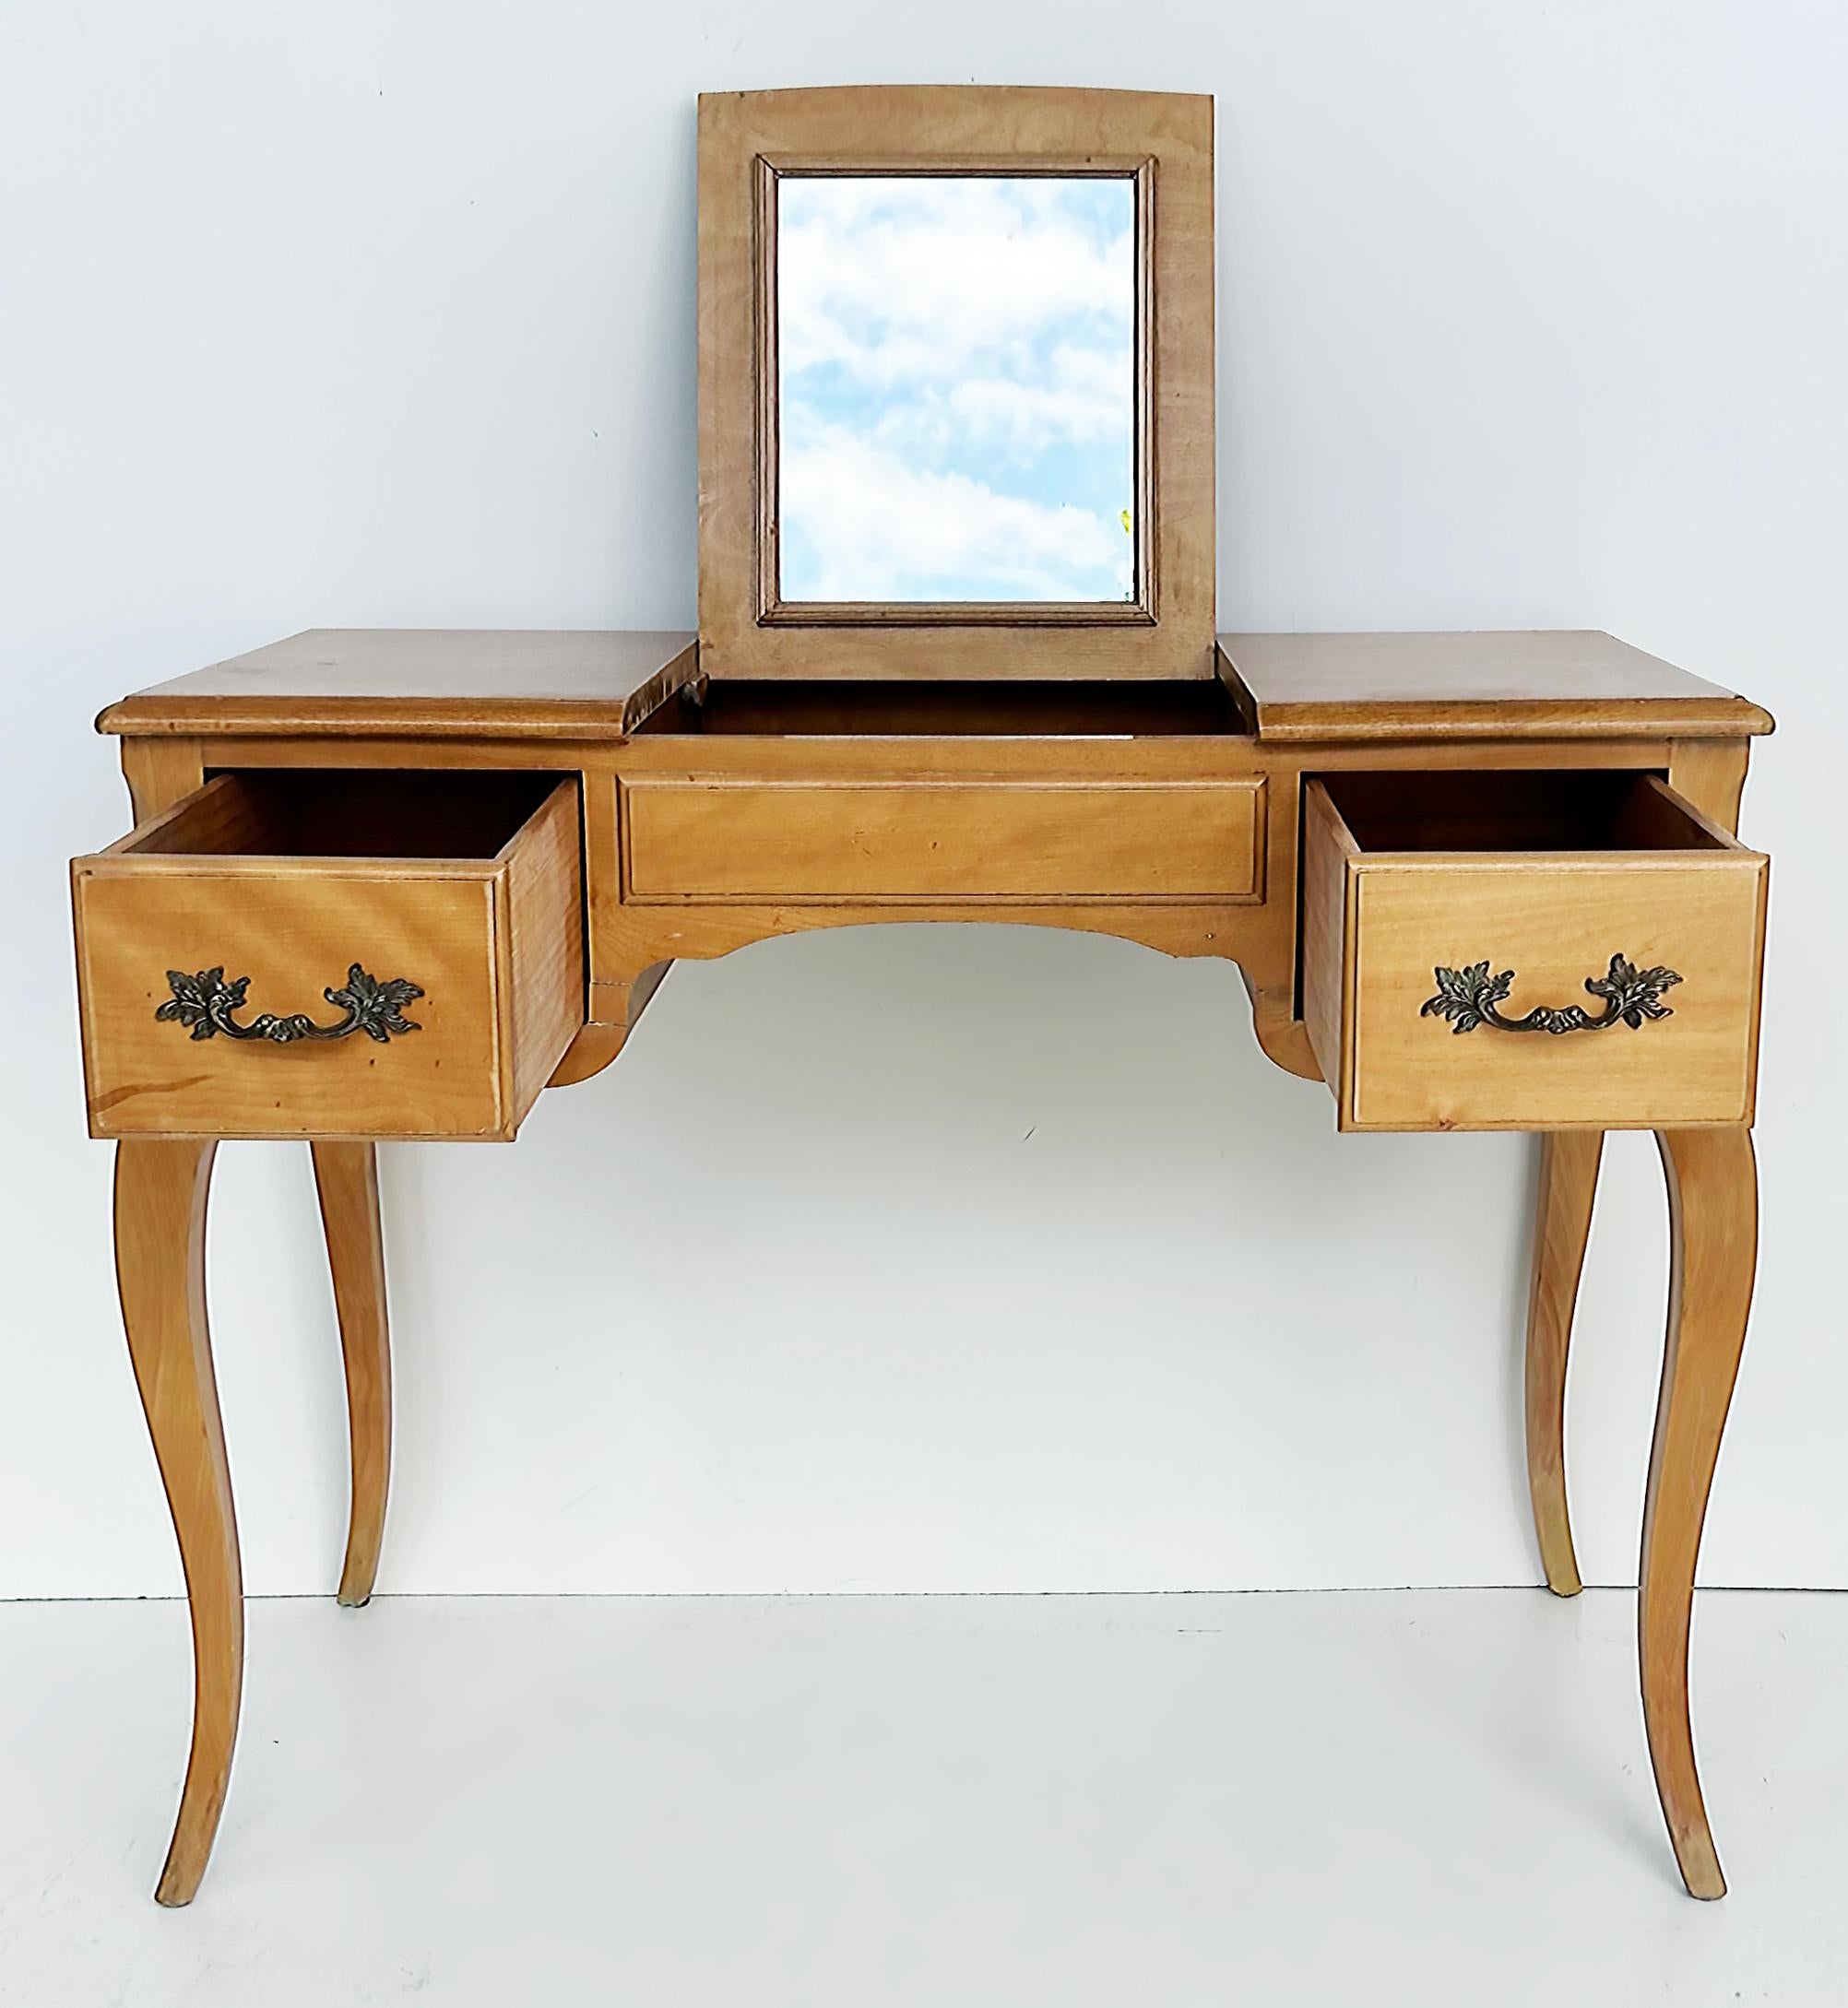 French Provincial Jacques Bodart French Blonde Wood 3-Drawer Vanity Table with Flip-up Mirror For Sale